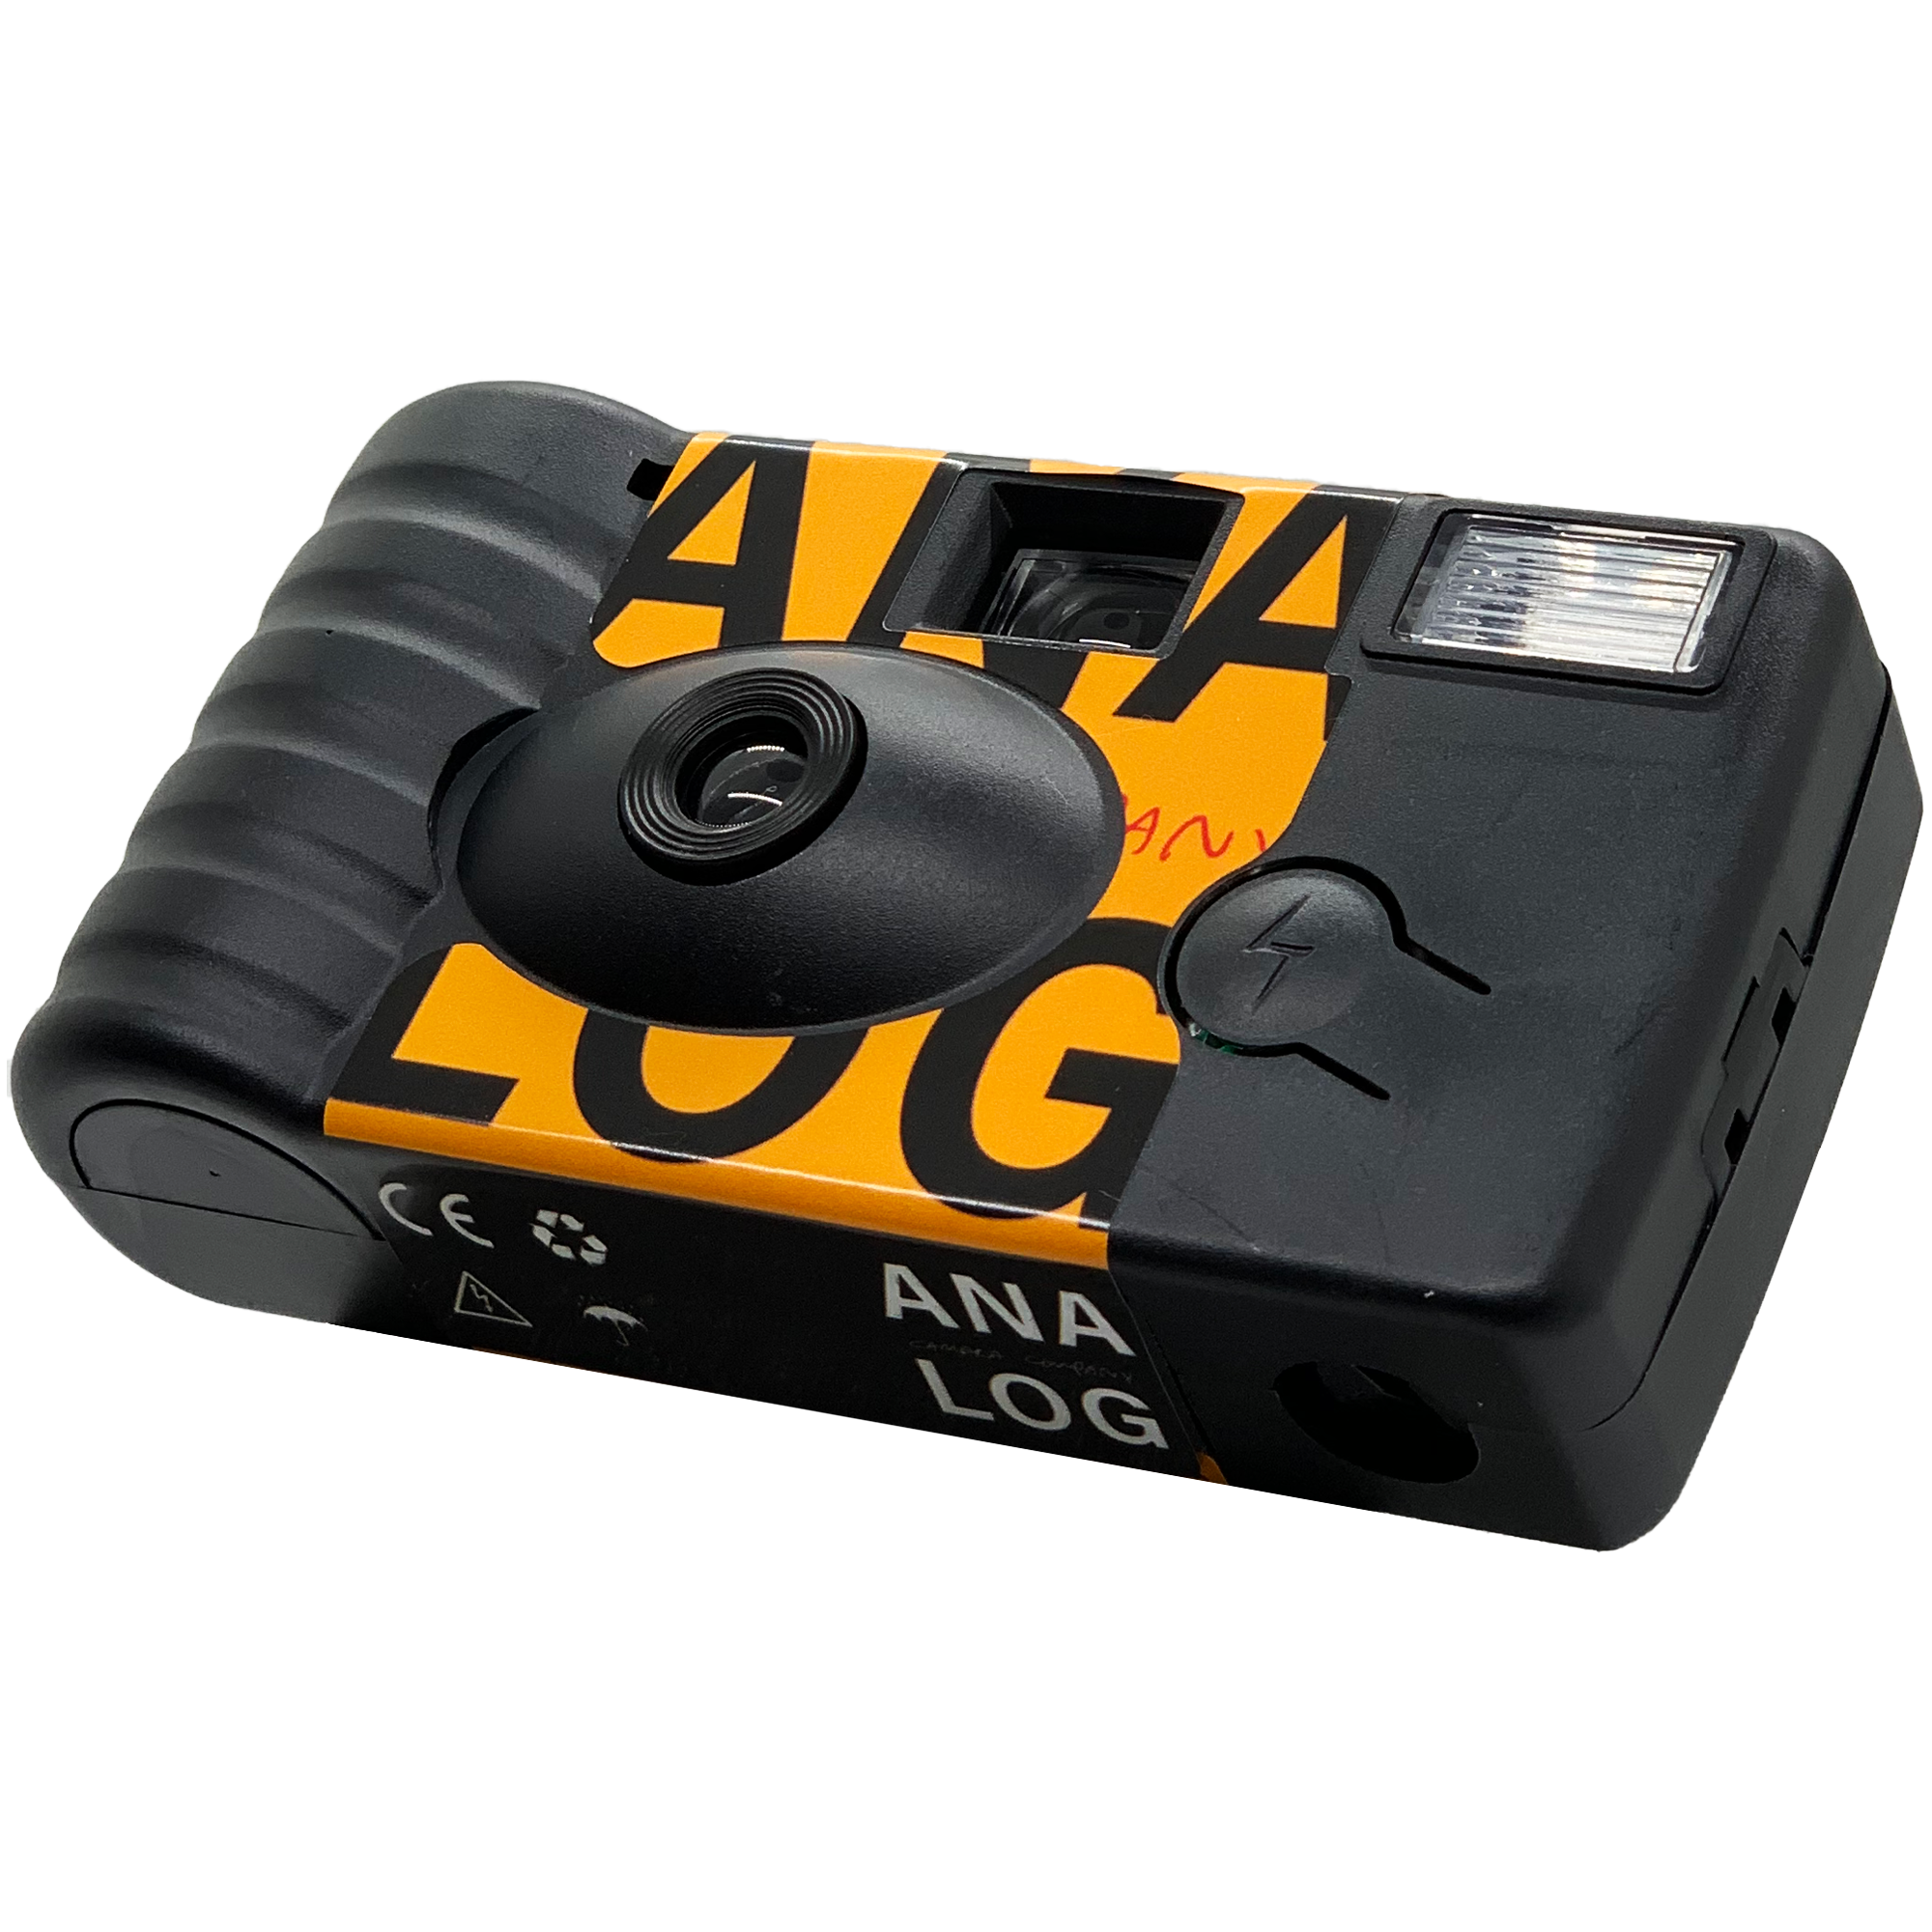 What To Do With Your Expired Disposable Camera – Analog Camera Company